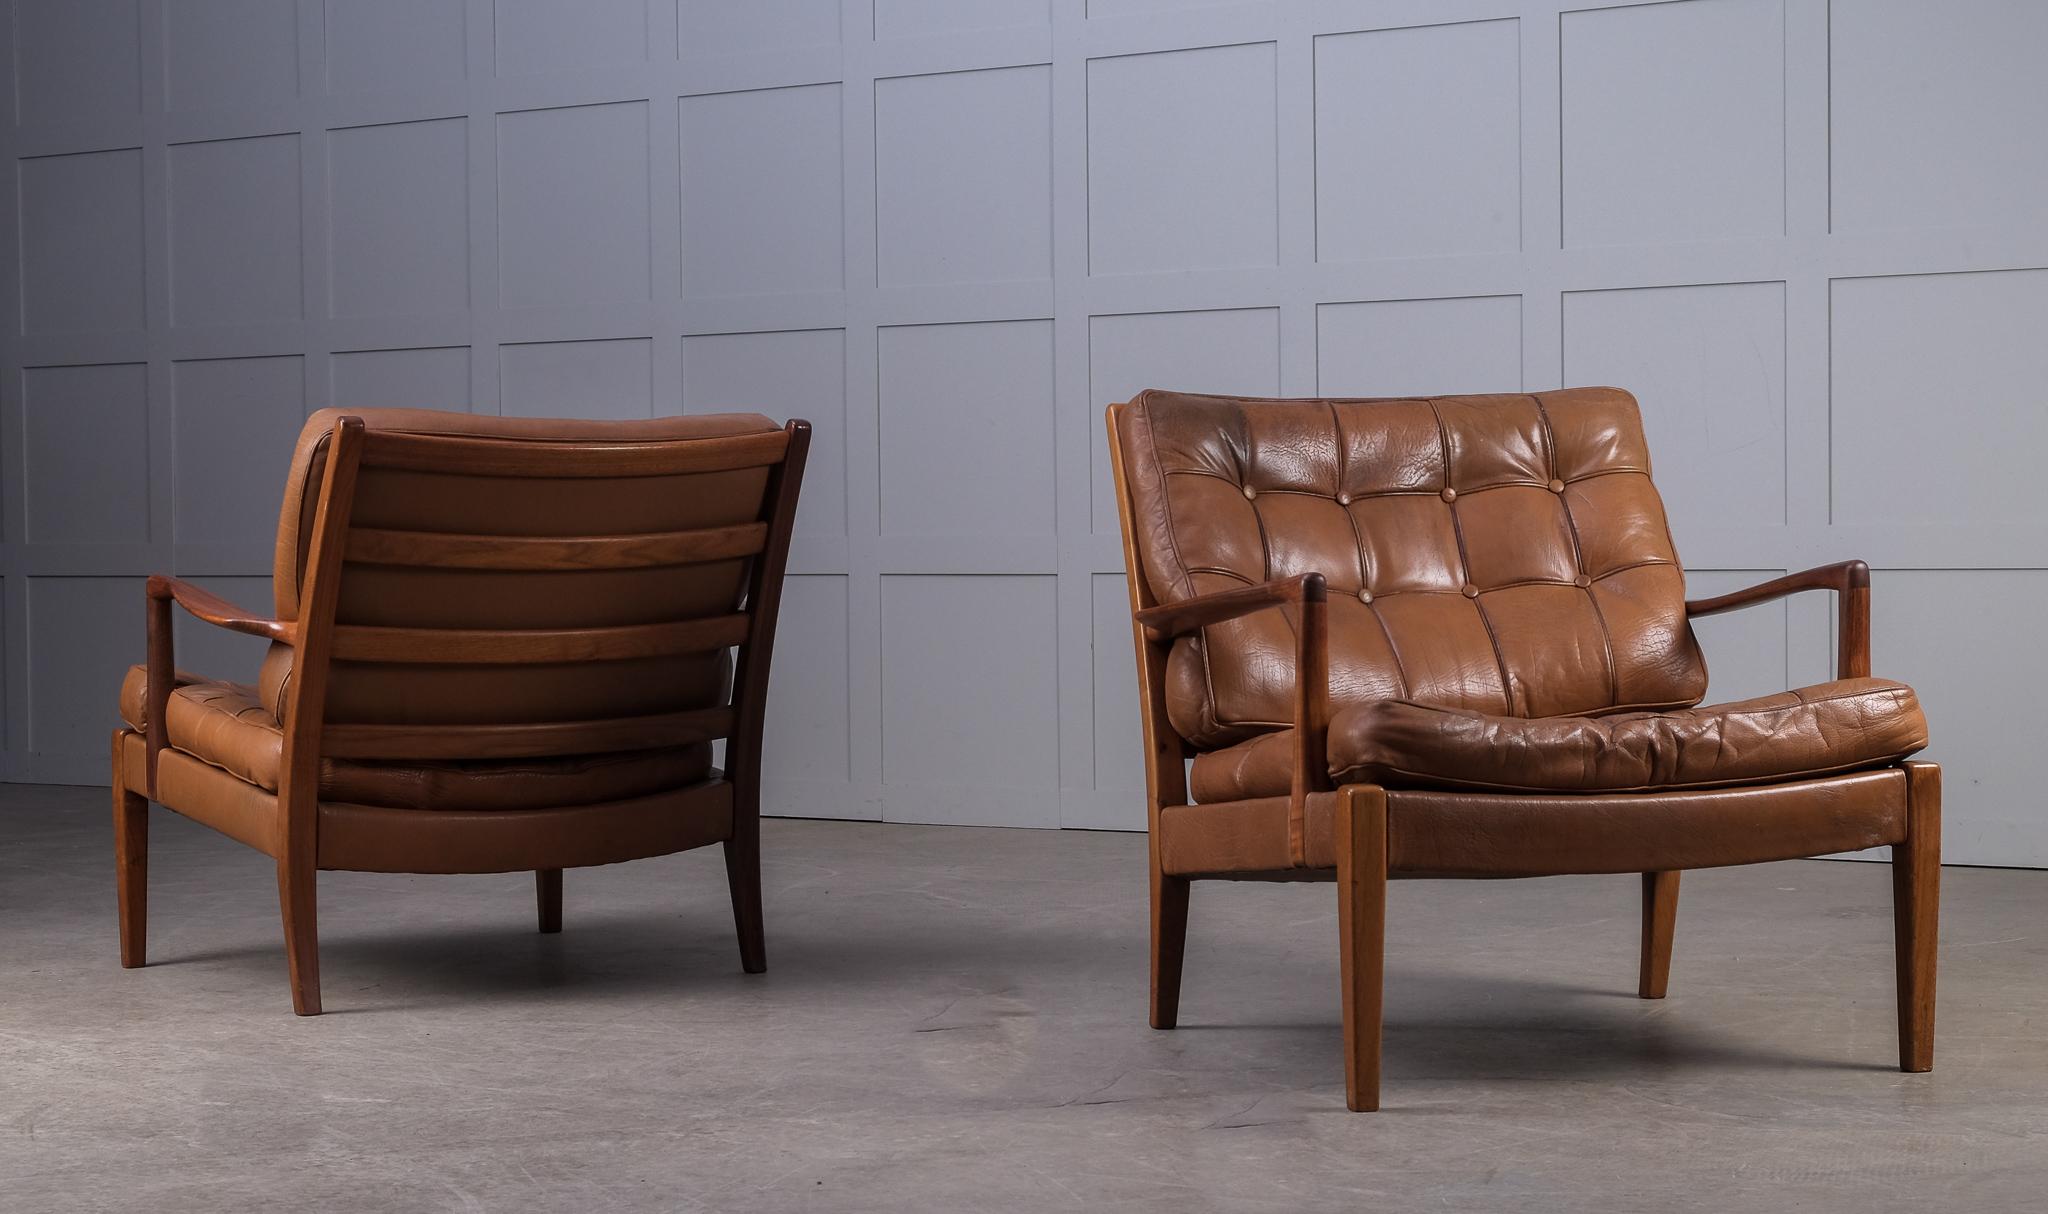 Easy chairs model Loven designed by Arne Norell. Produced by Arne Norell AB in Aneby, Sweden, 1960s. Original cognac buffalo leather.